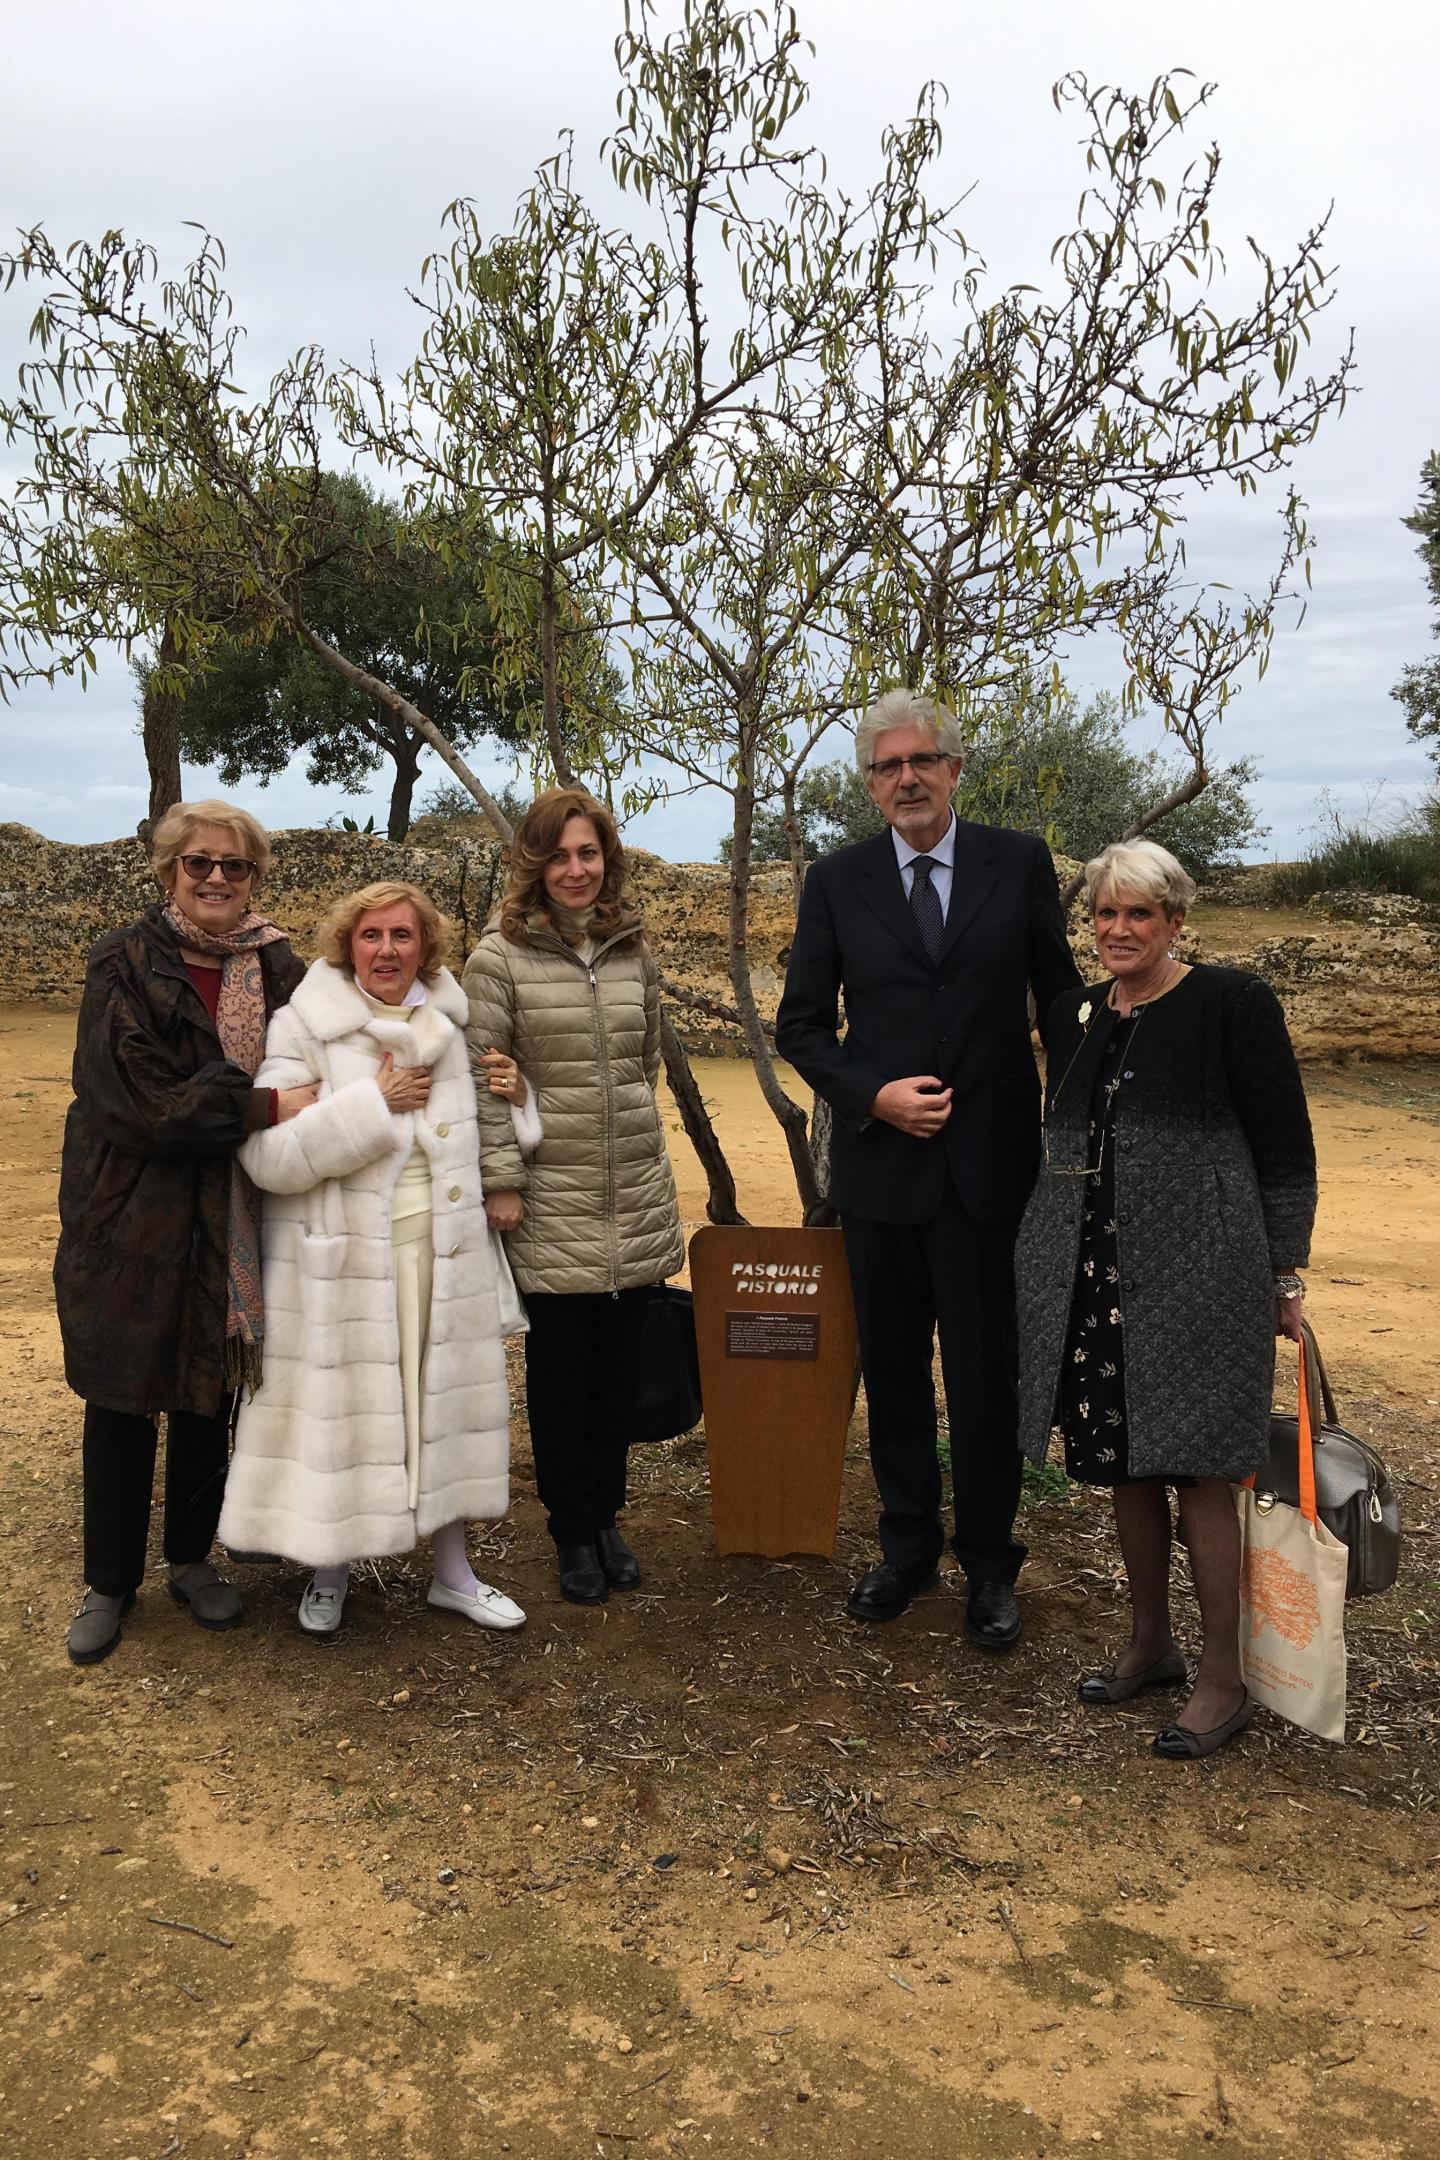 Ulianova Radice, Assunta Gallo, Honorary President of the Academy of Mediterranean Studies, Elena Pistorio, daughter of the Righteous, the Prefect of Agrigento Nicola Diomede, the journalist Maria Cecilia Sangiorgi with the plate dedicated to Pasquale Pis